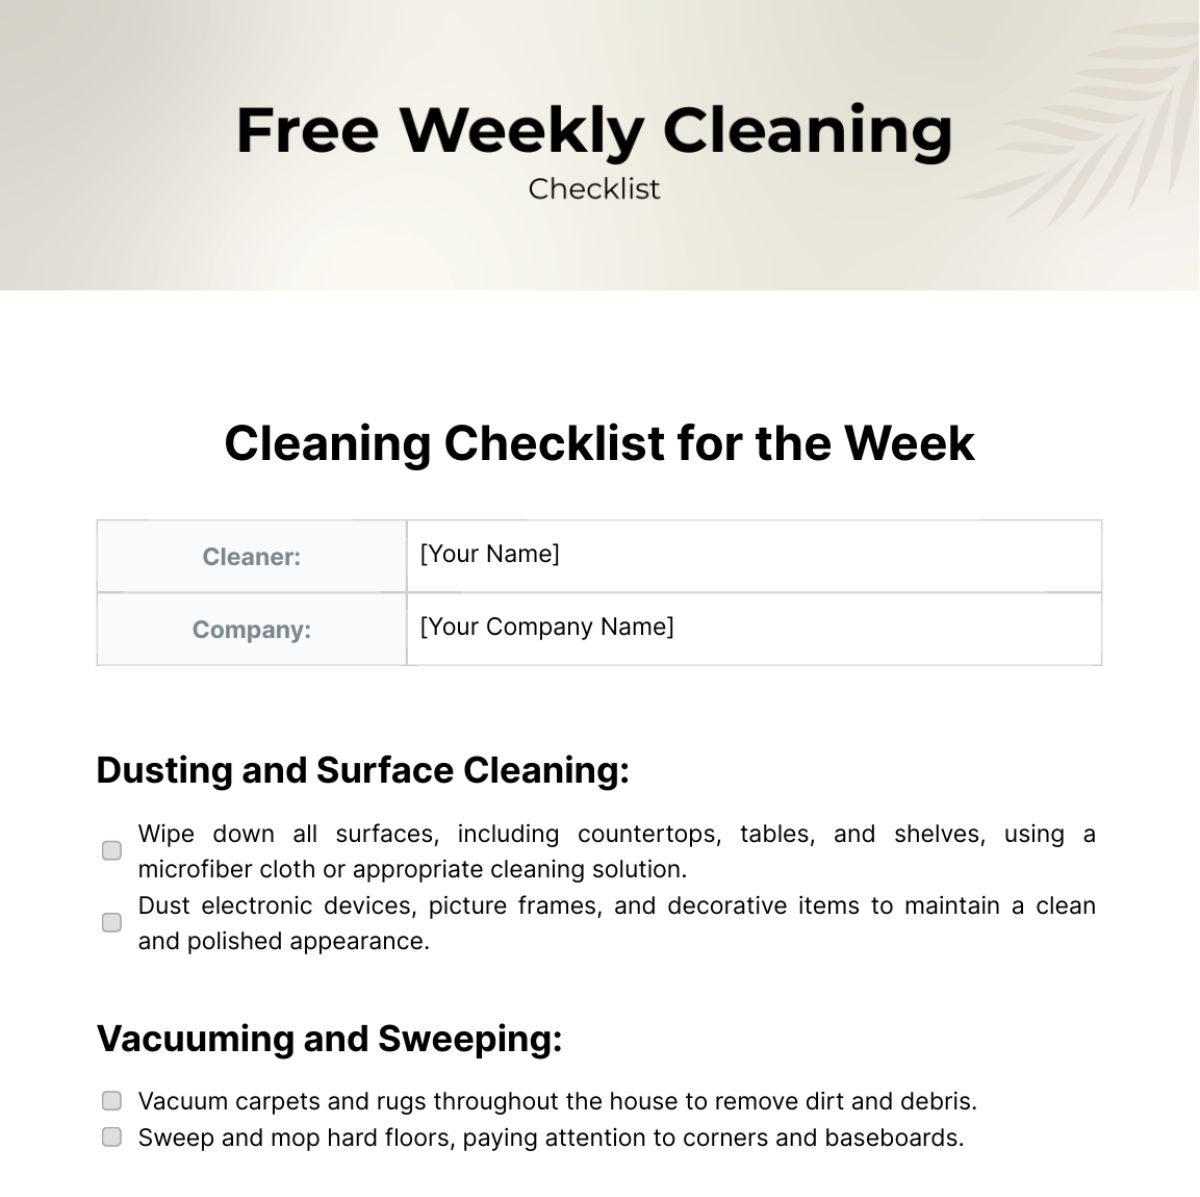 Free Weekly Cleaning Checklist Template